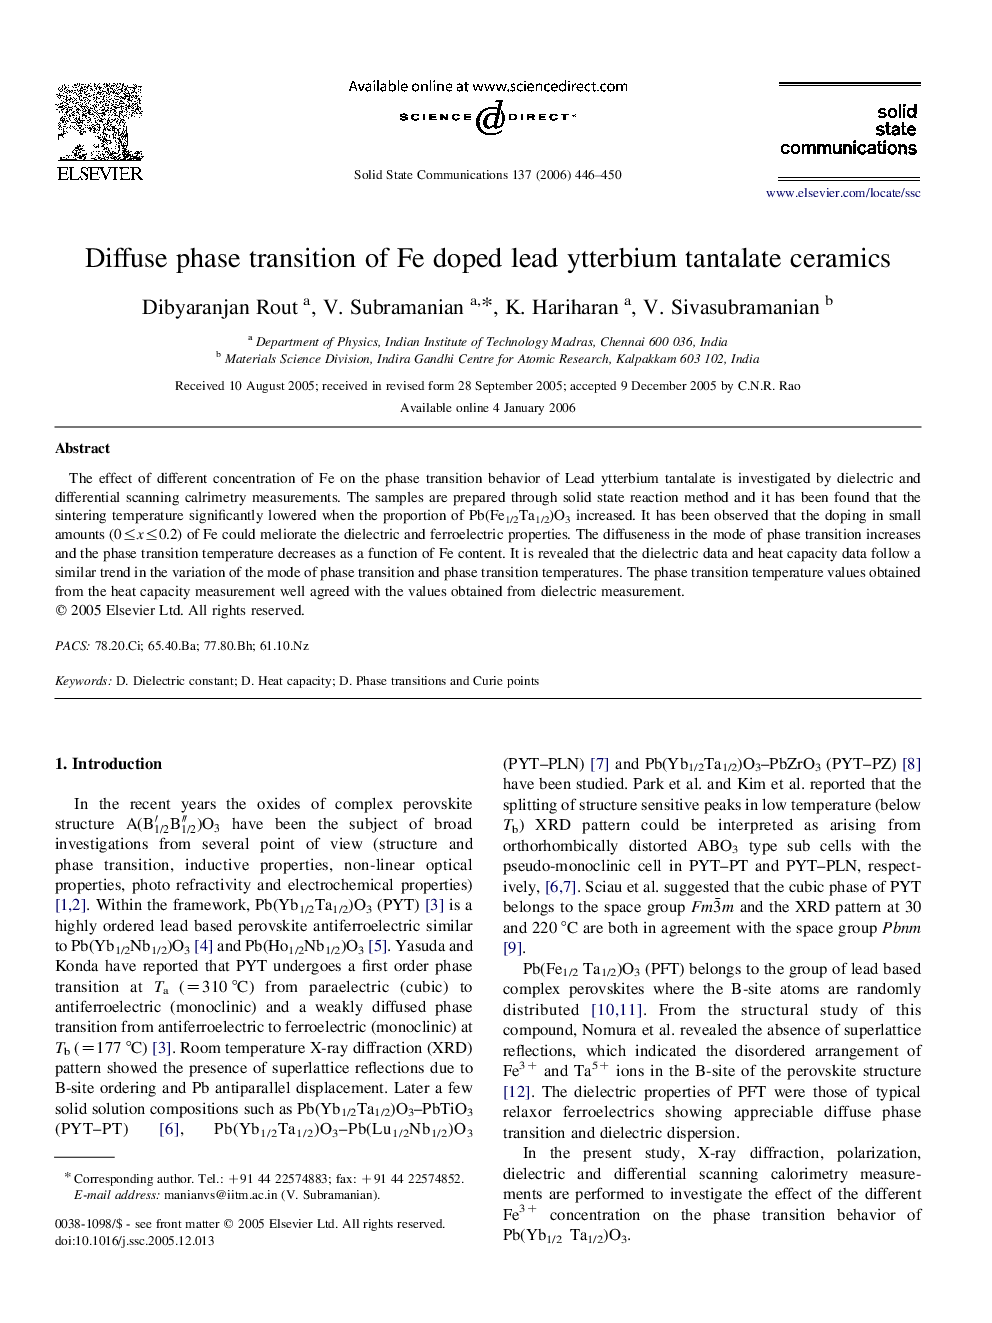 Diffuse phase transition of Fe doped lead ytterbium tantalate ceramics